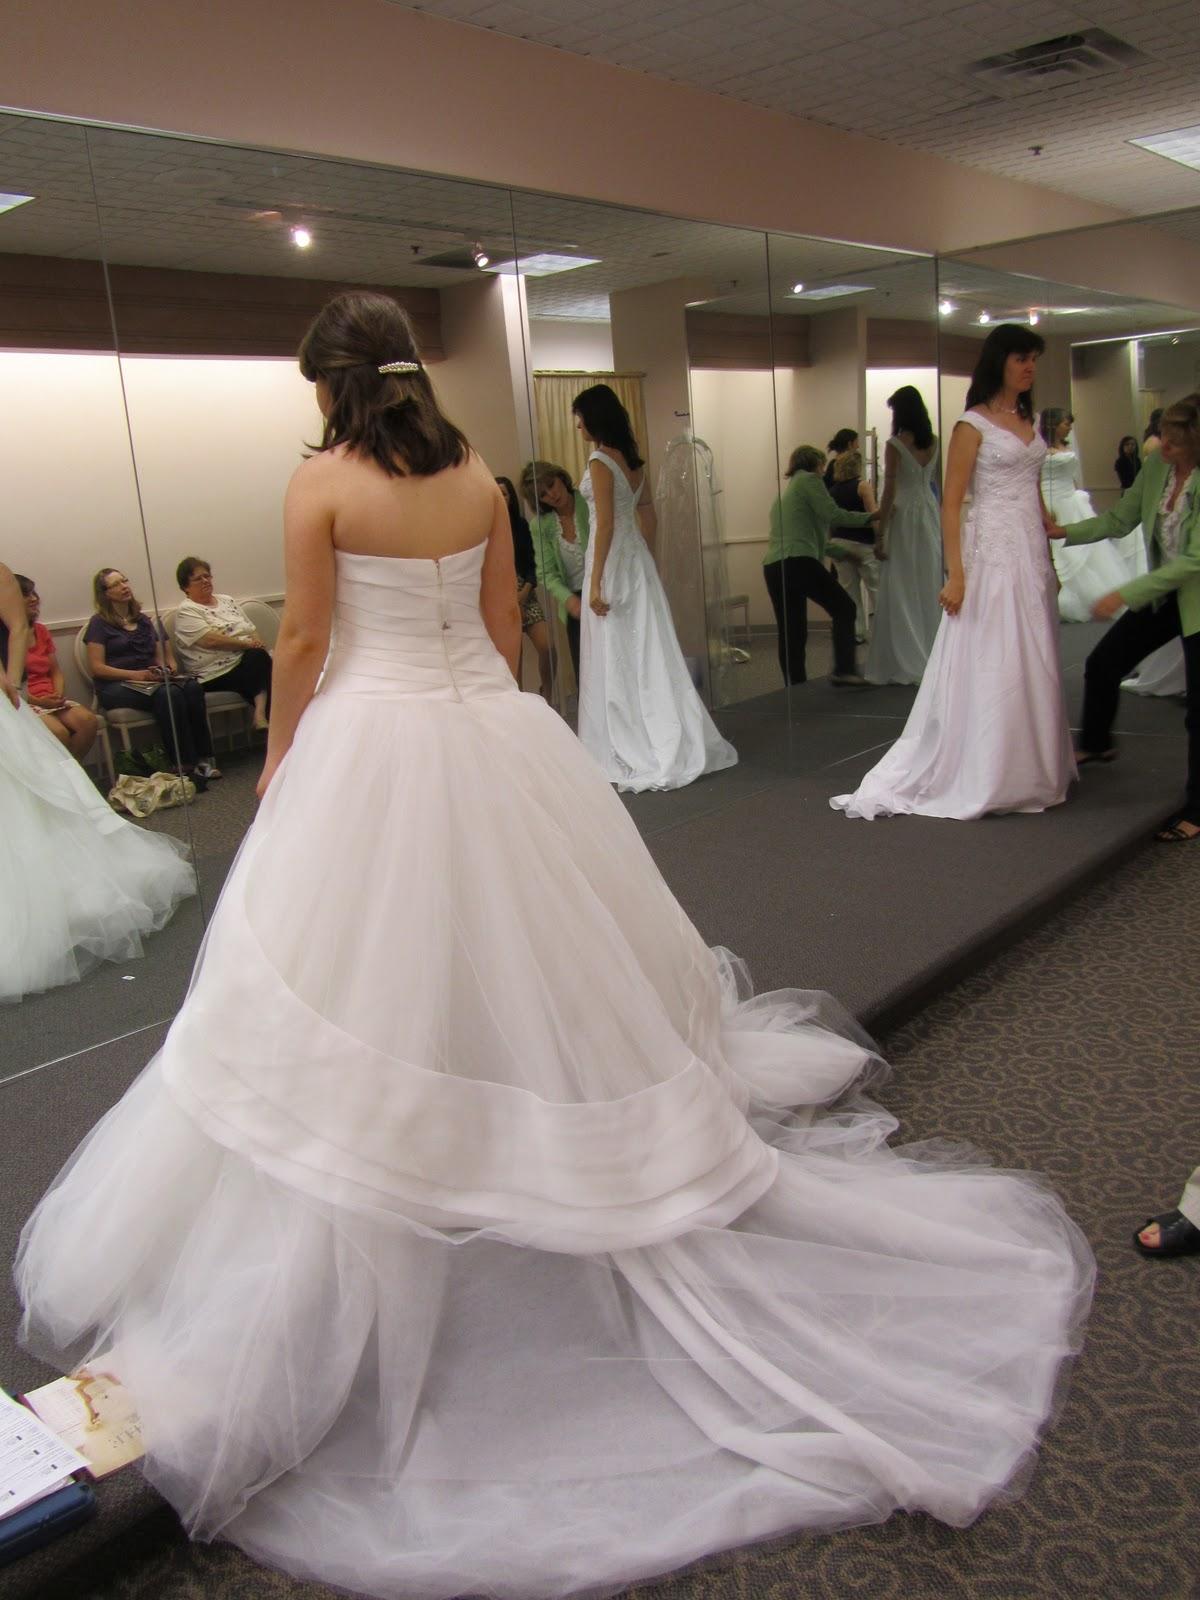 Saying No to the Dress